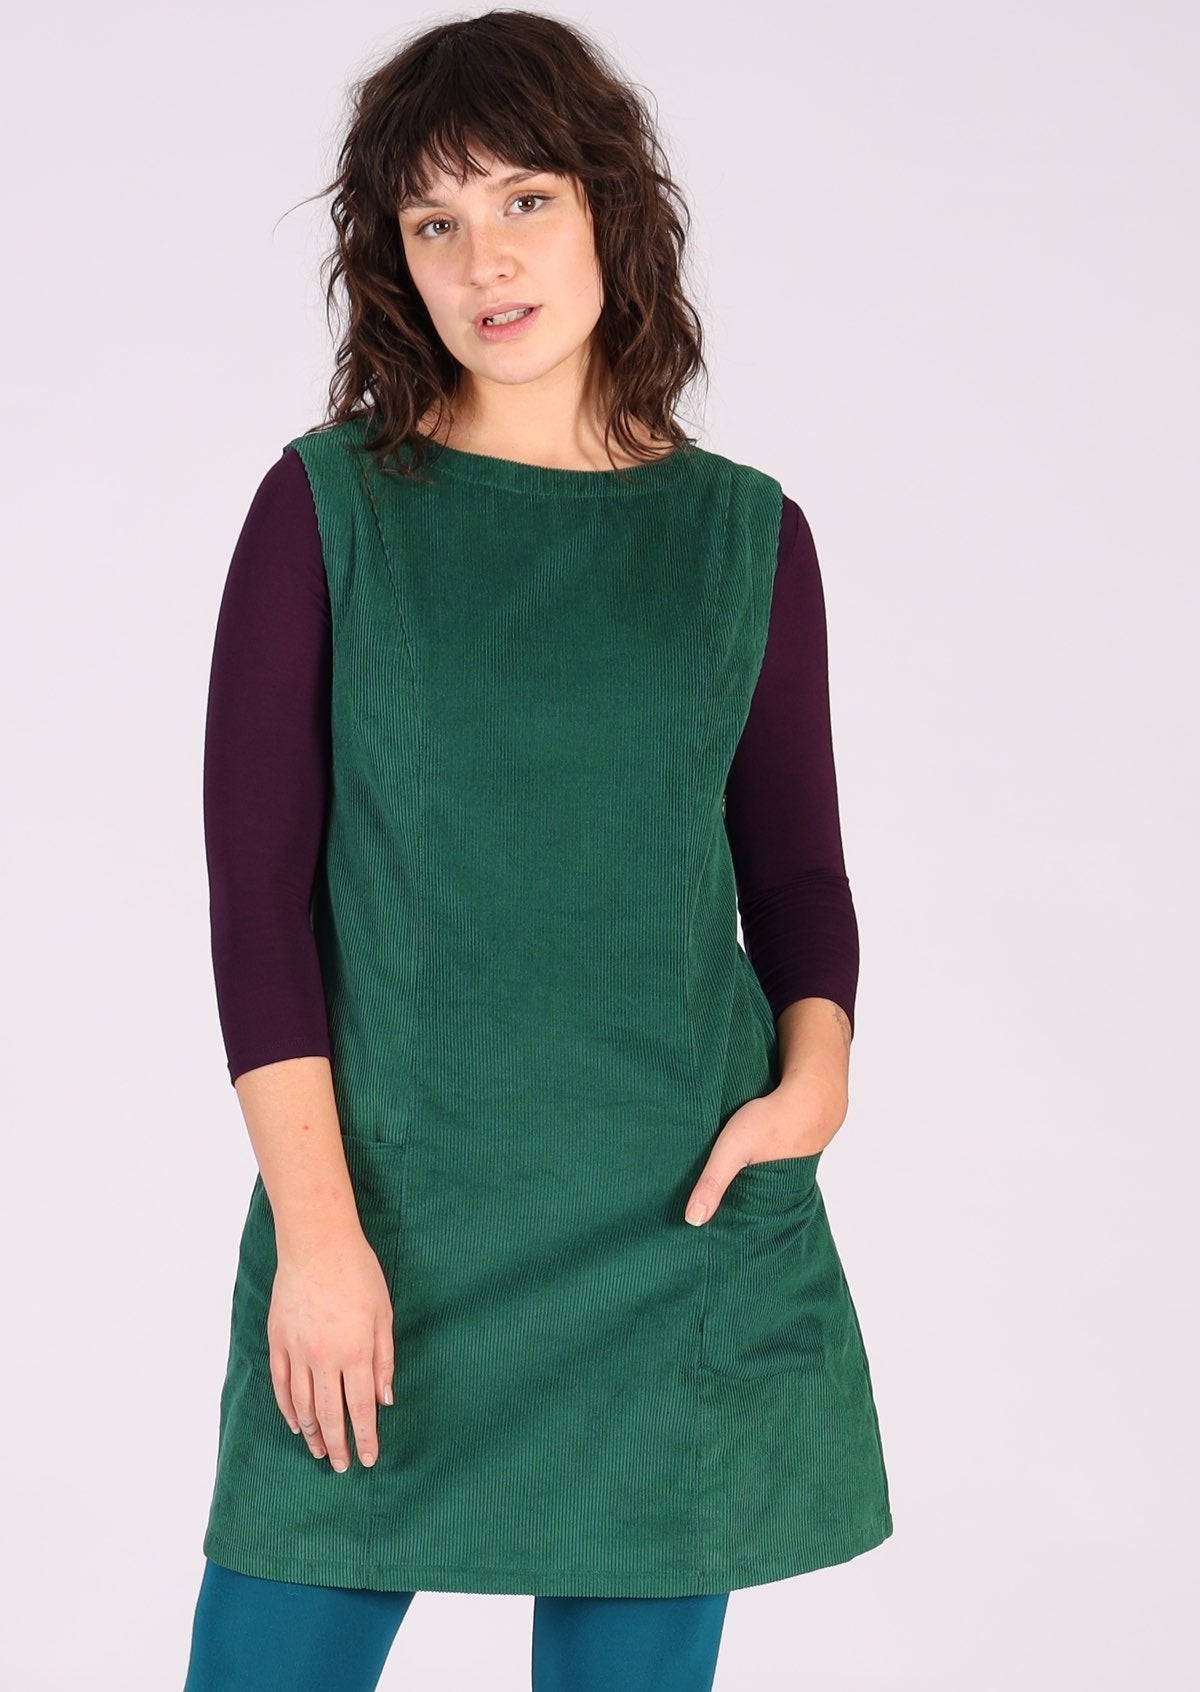 Green corduroy above knee tunic with front pockets